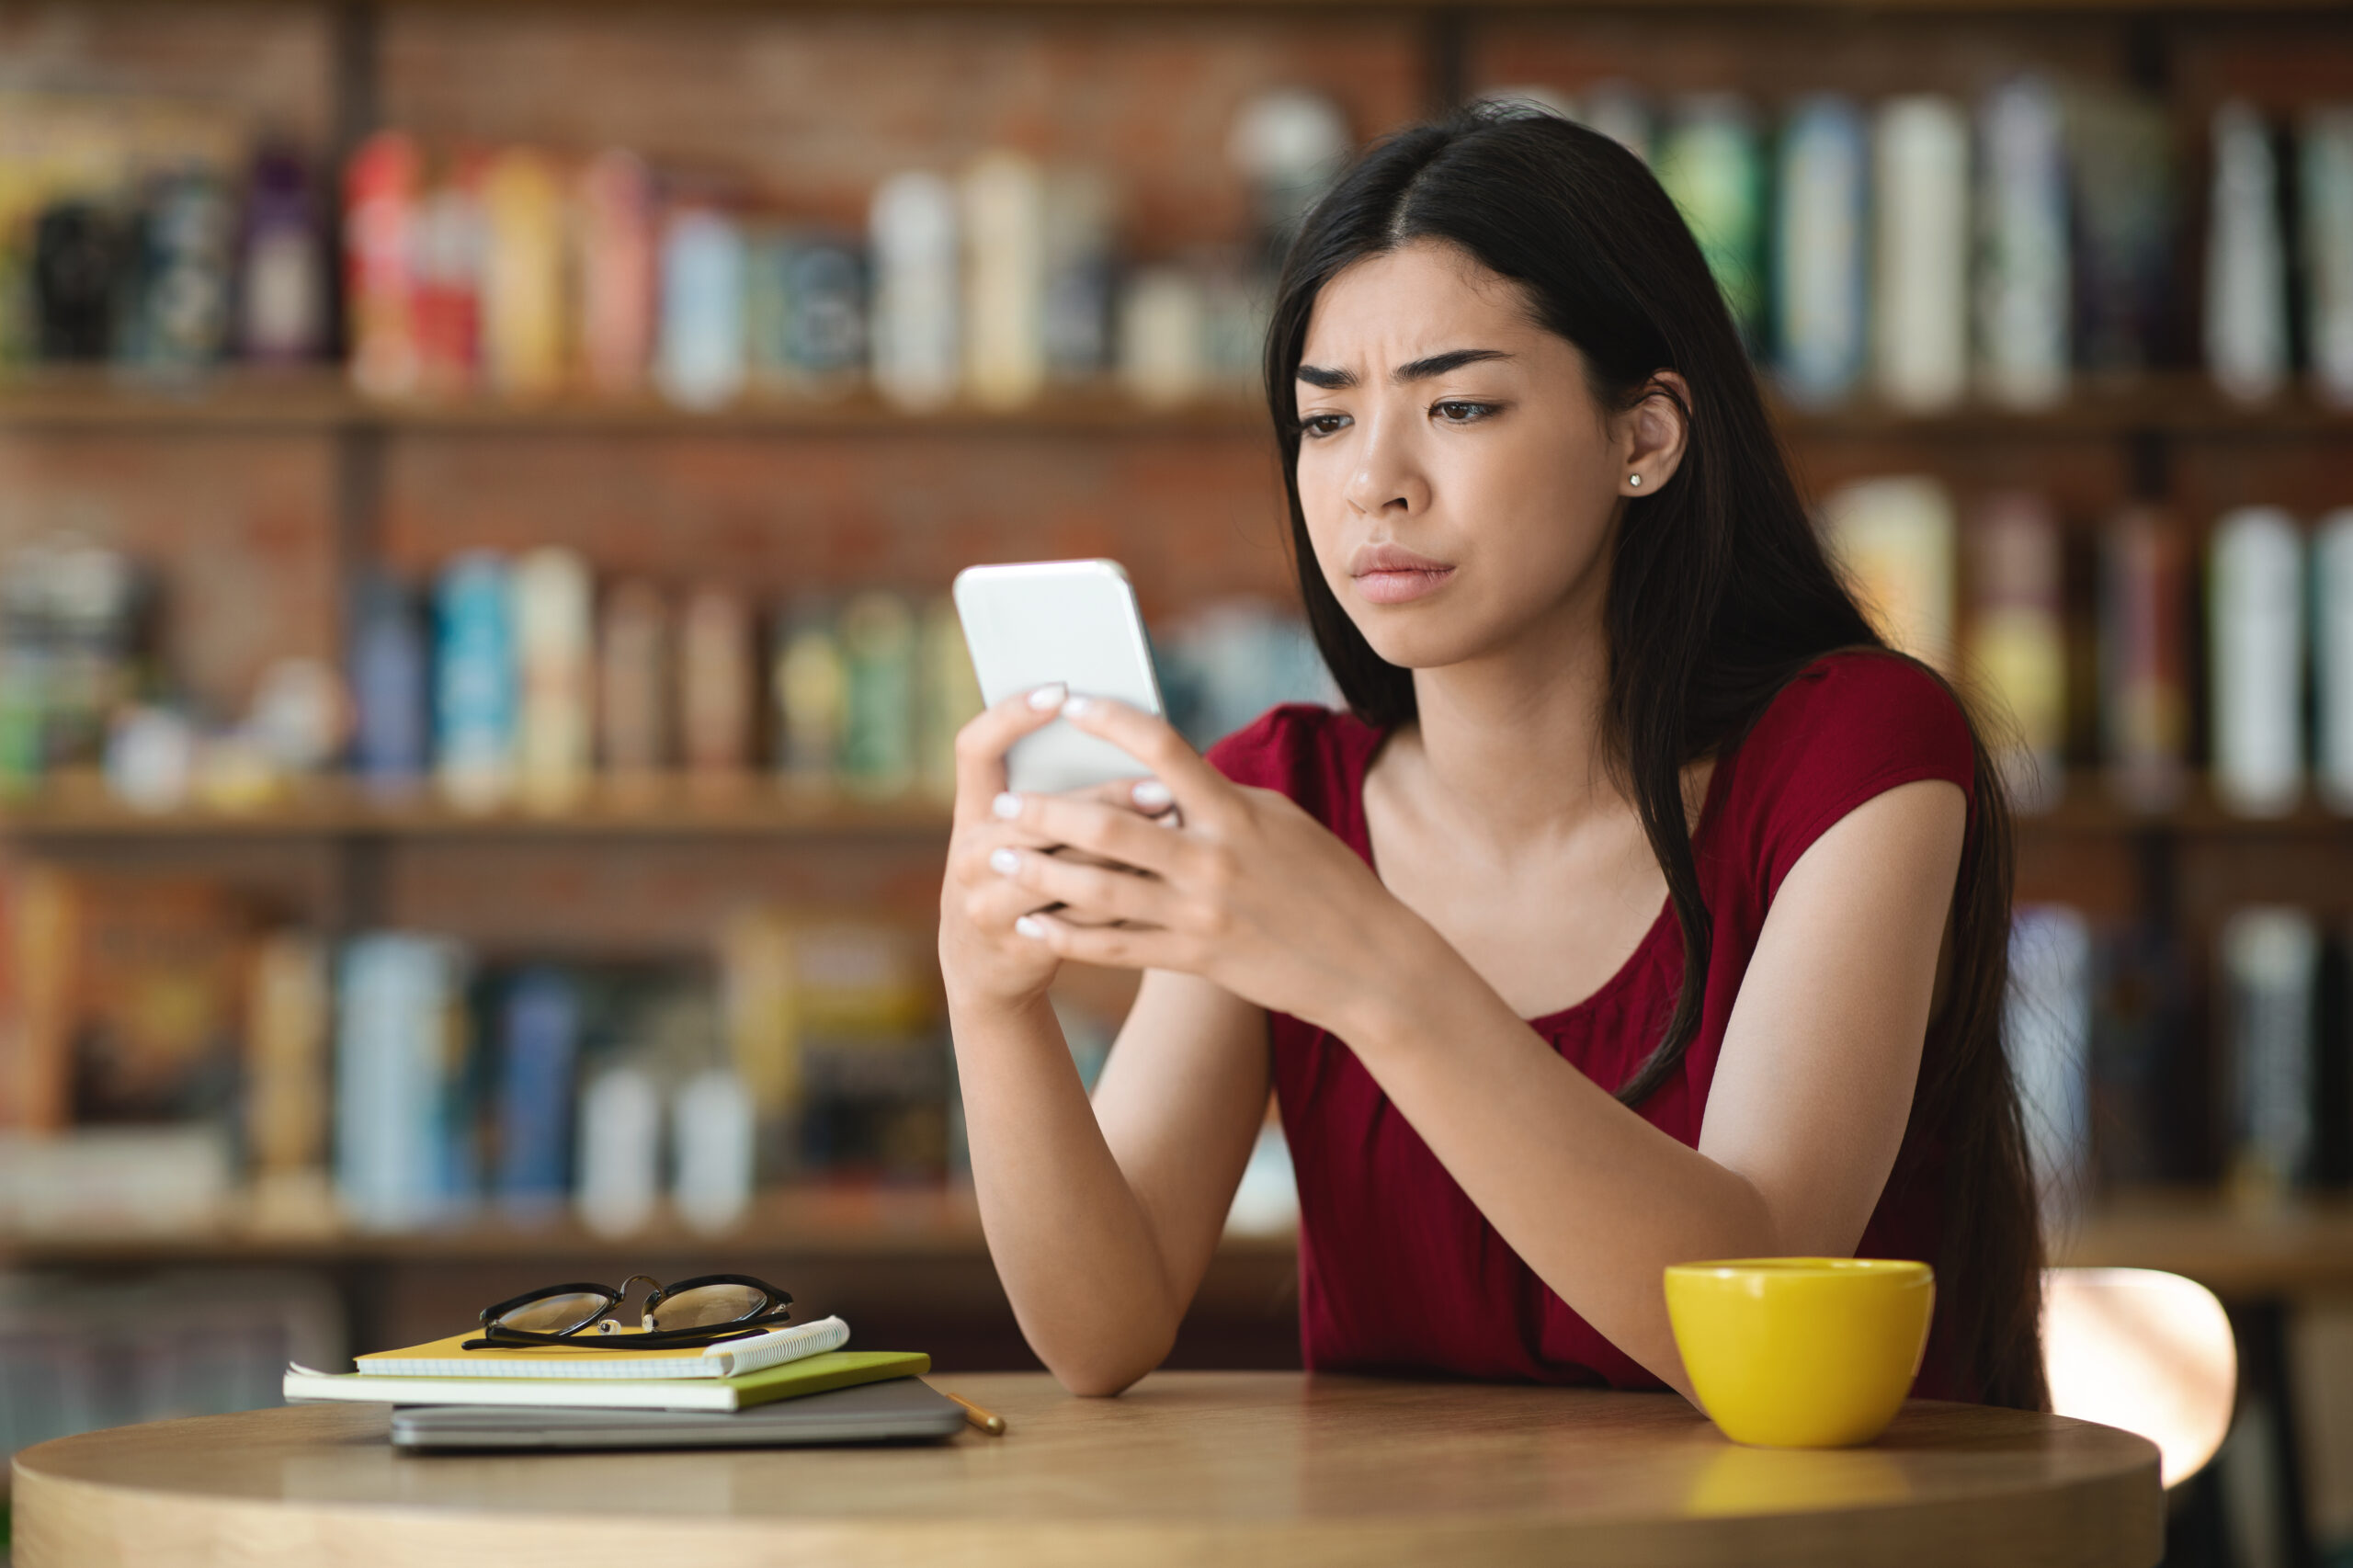 Bad News. Upset Asian Girl Looking At Smartphone Screen In Cafe, Reading Message